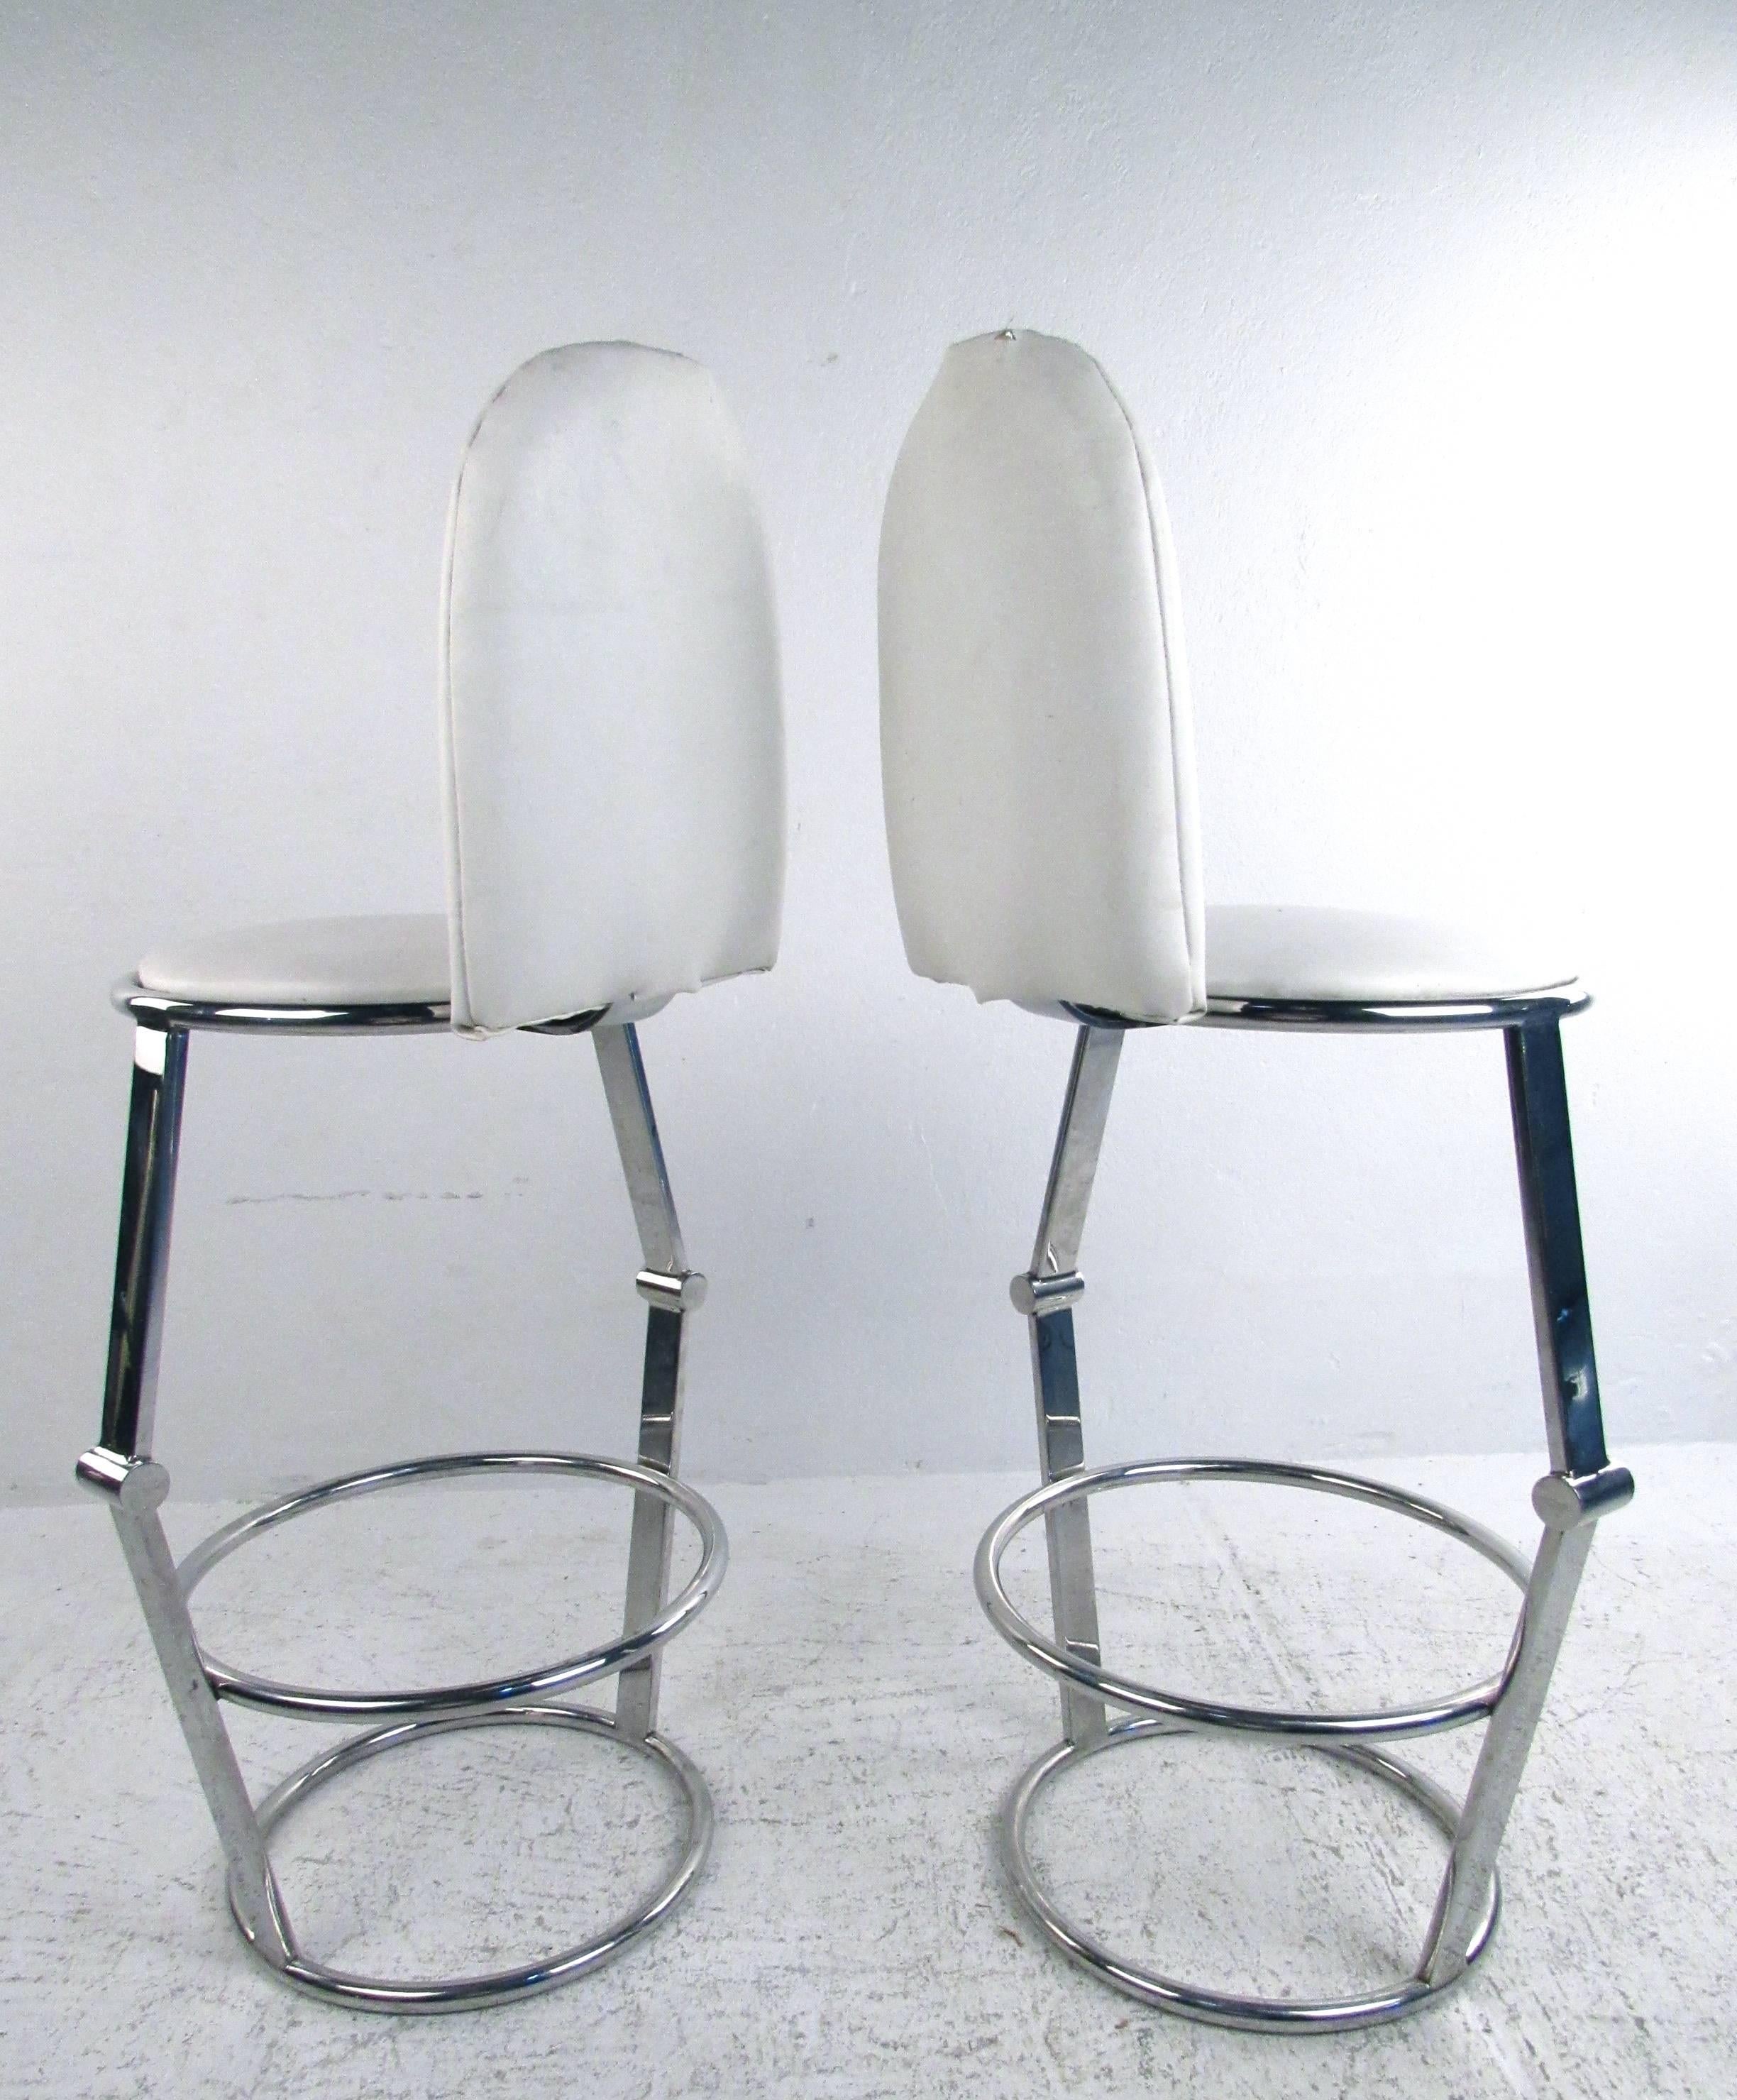 This pair of unique vintage bar stools features a truly unique modern style with comfortable upholstered seats. Chrome frames include circular footrests, with a seat height of 27.5 inches. Please confirm item location (NY or NJ).